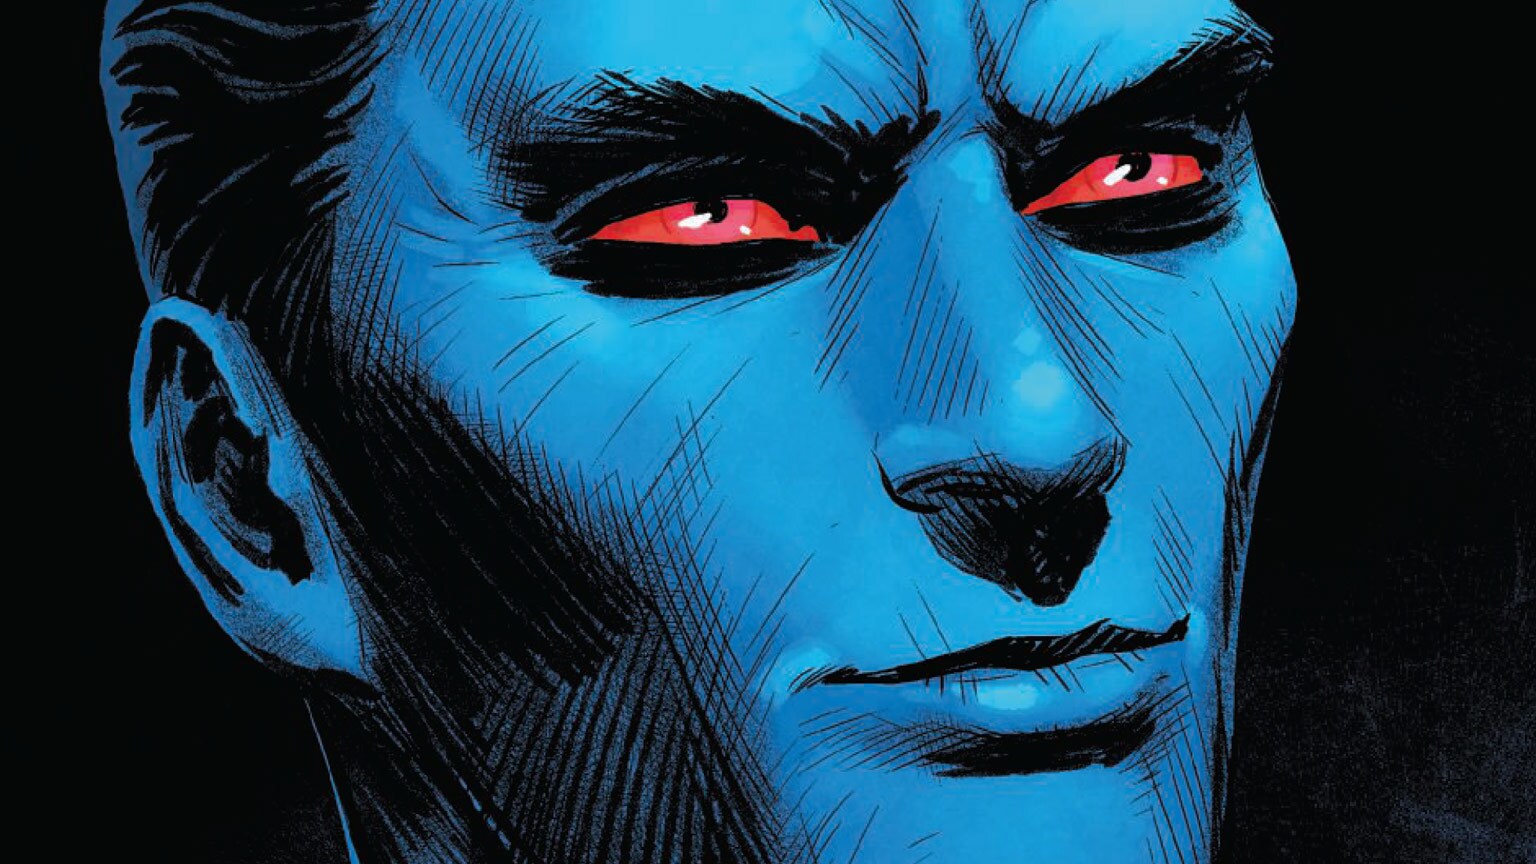 Who is Grand Admiral Thrawn?